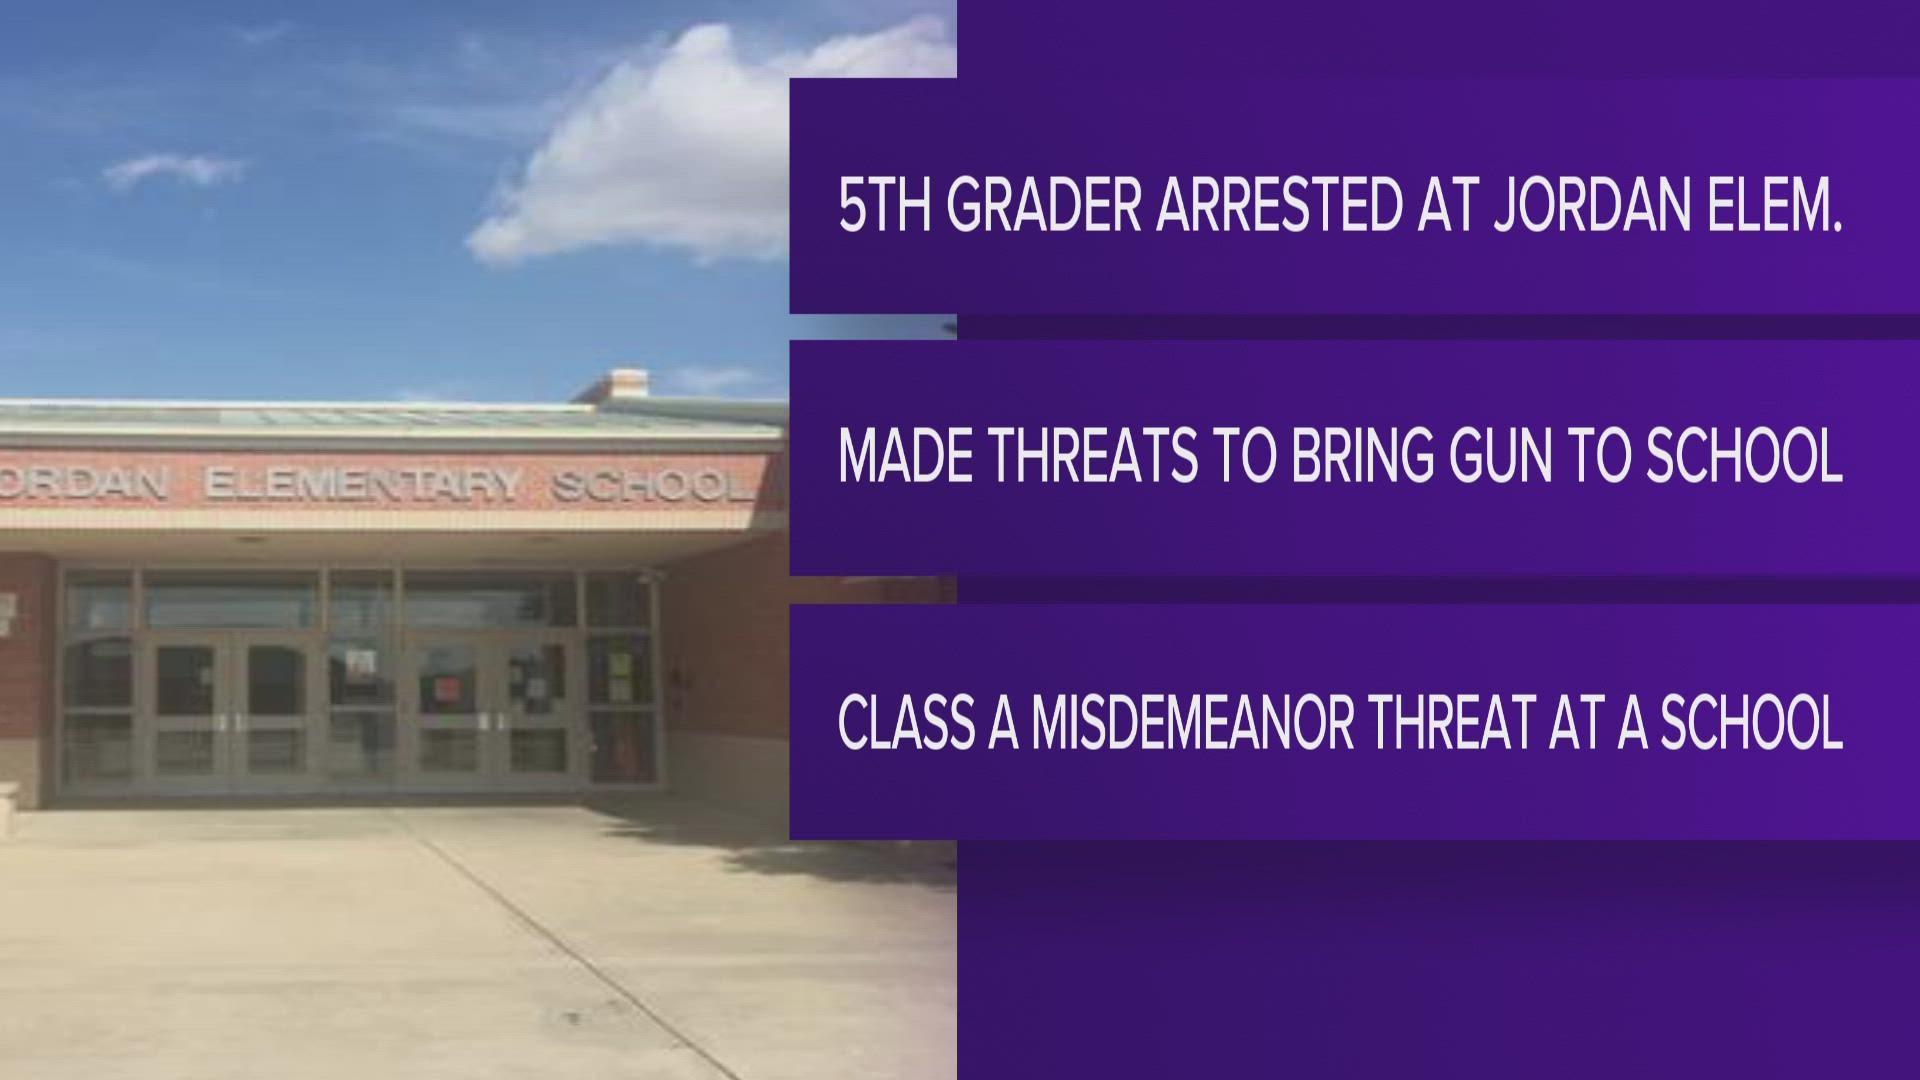 The boy, who is a student at Jordan Elementary, made a threat to the school Wednesday.